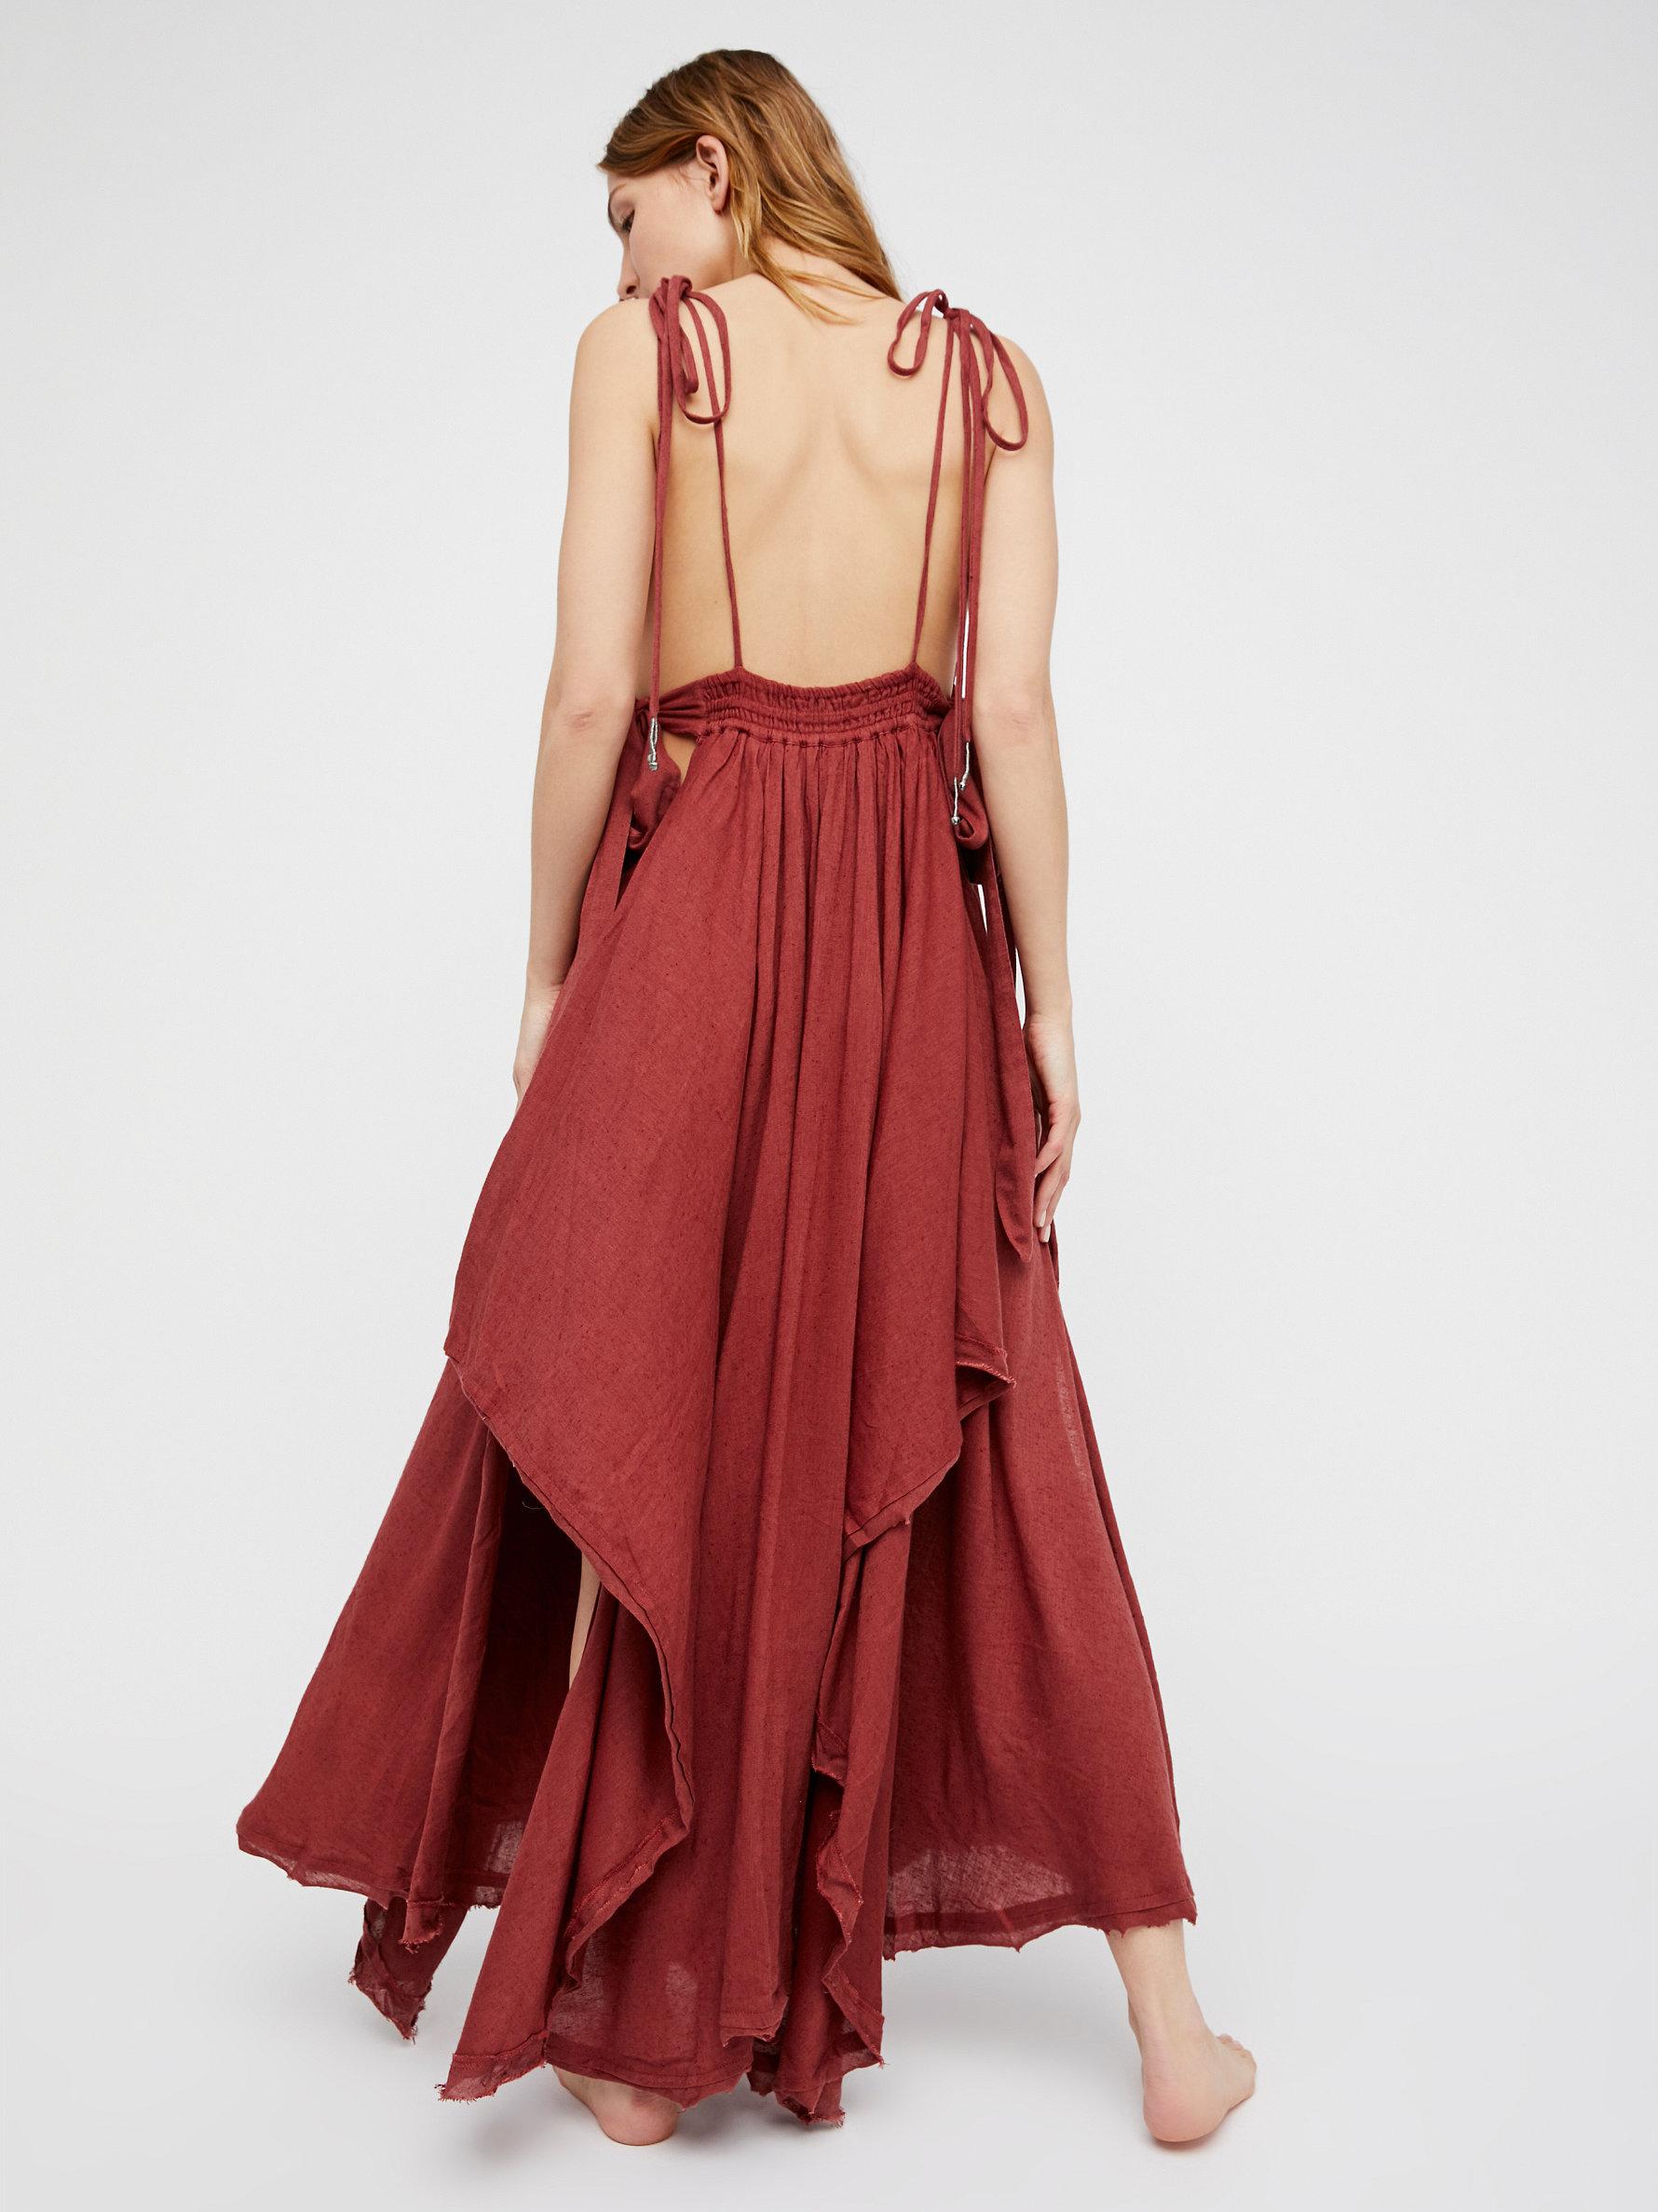 Lyst - Free People Tropical Heat Maxi Dress in Red